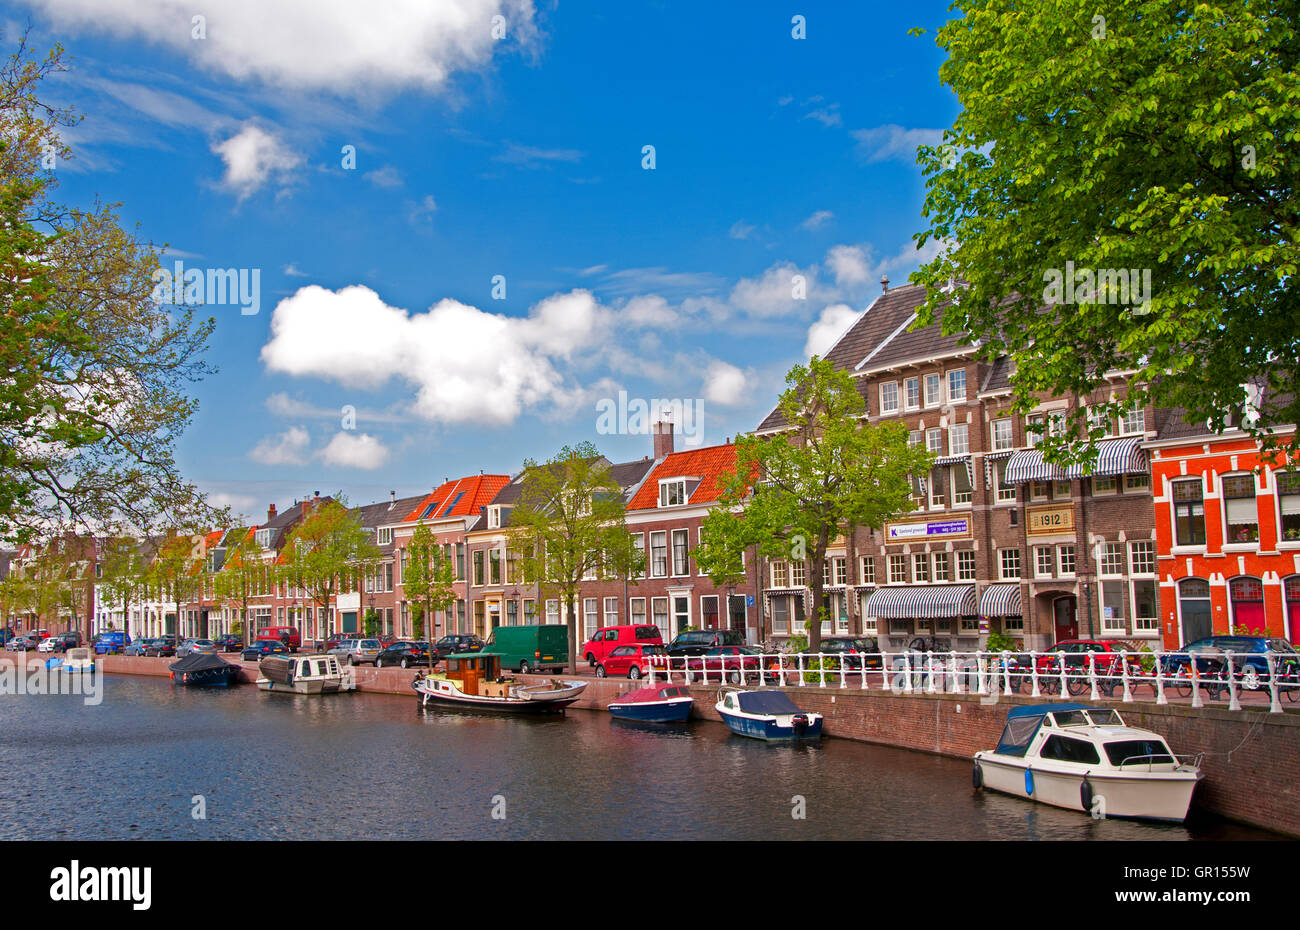 Street scene along a canal in Haarlem, Holland, the Netherlands Stock Photo